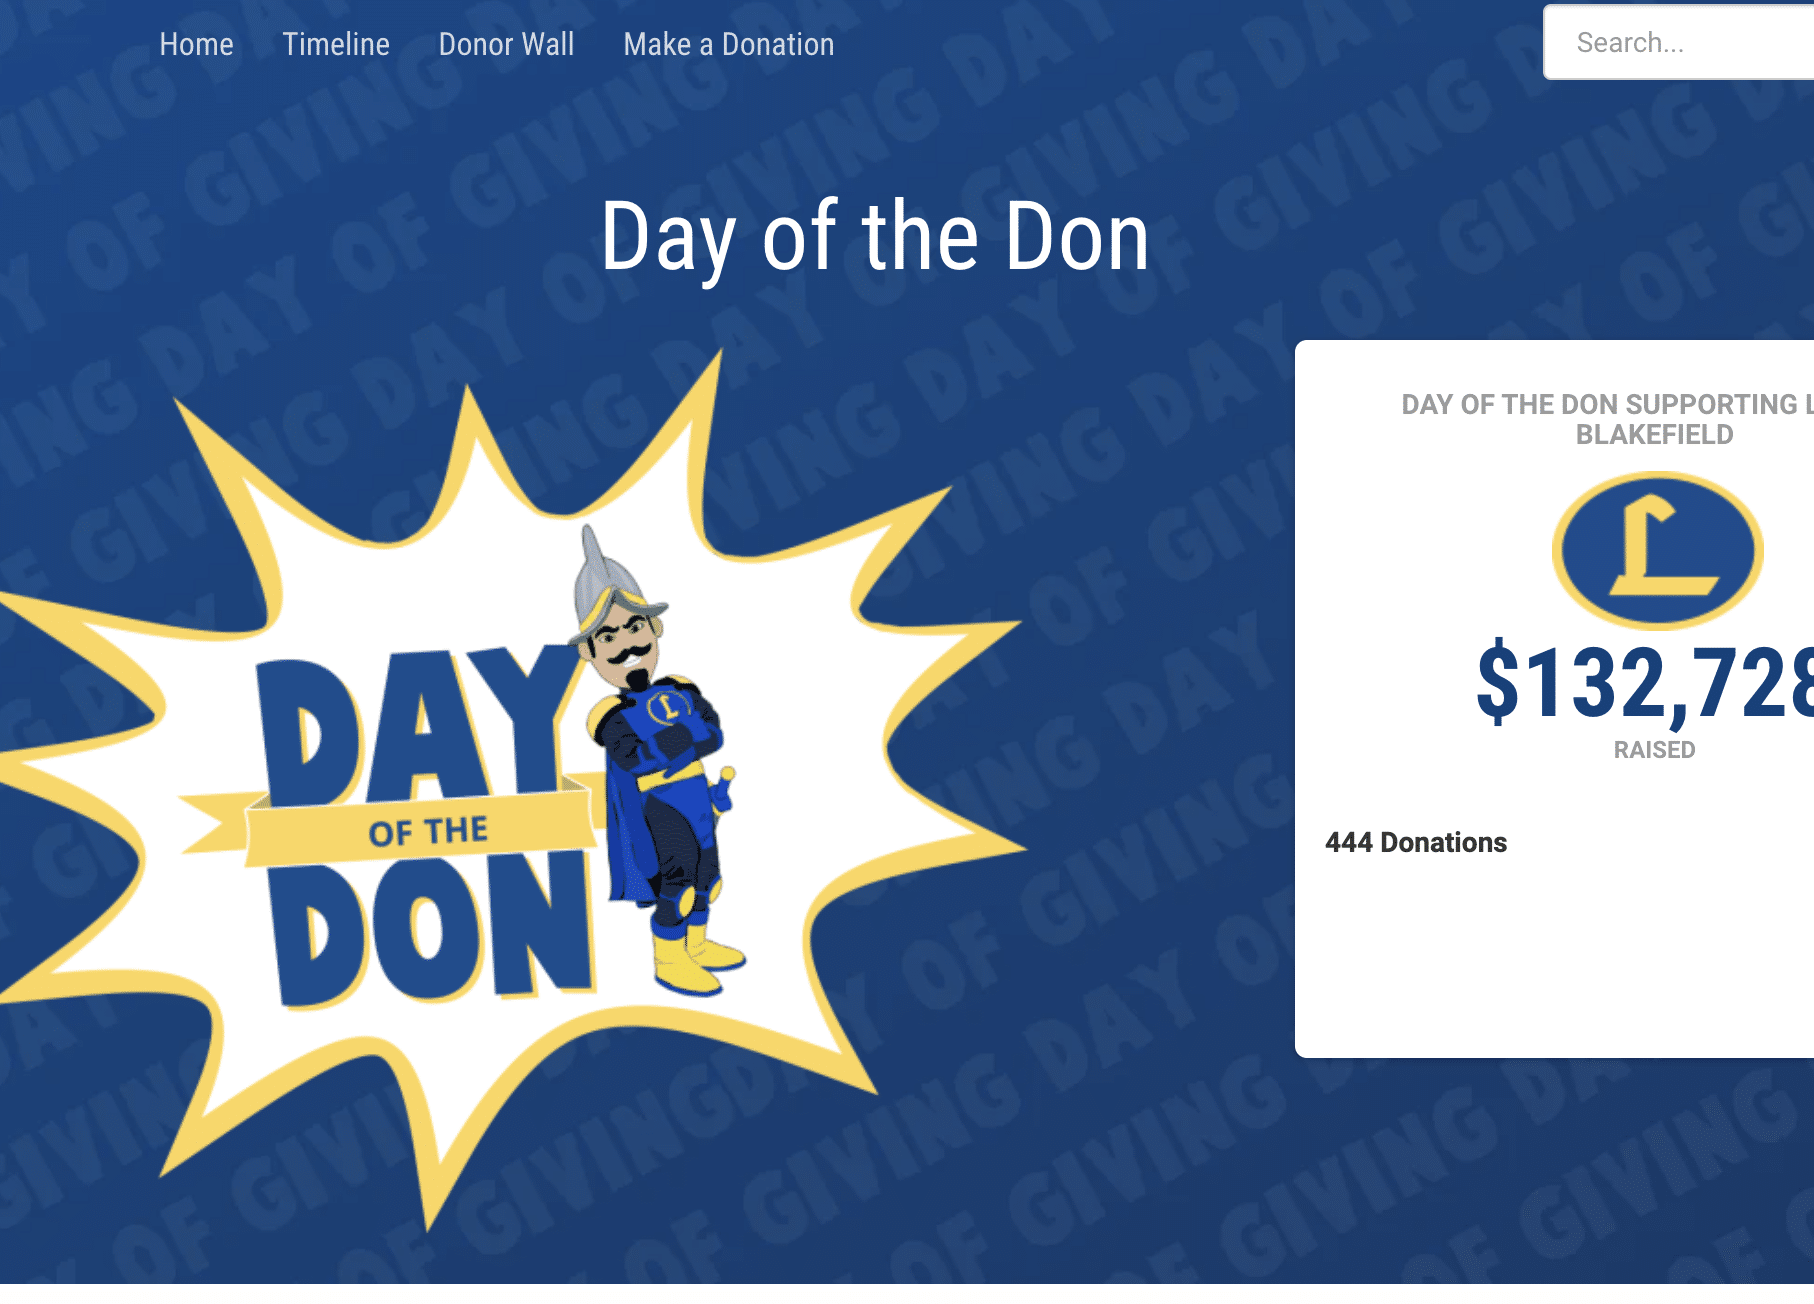 Web banner with a blue background and an explosion graphic with the text "DAY of the DON," with a silhouette of a person.